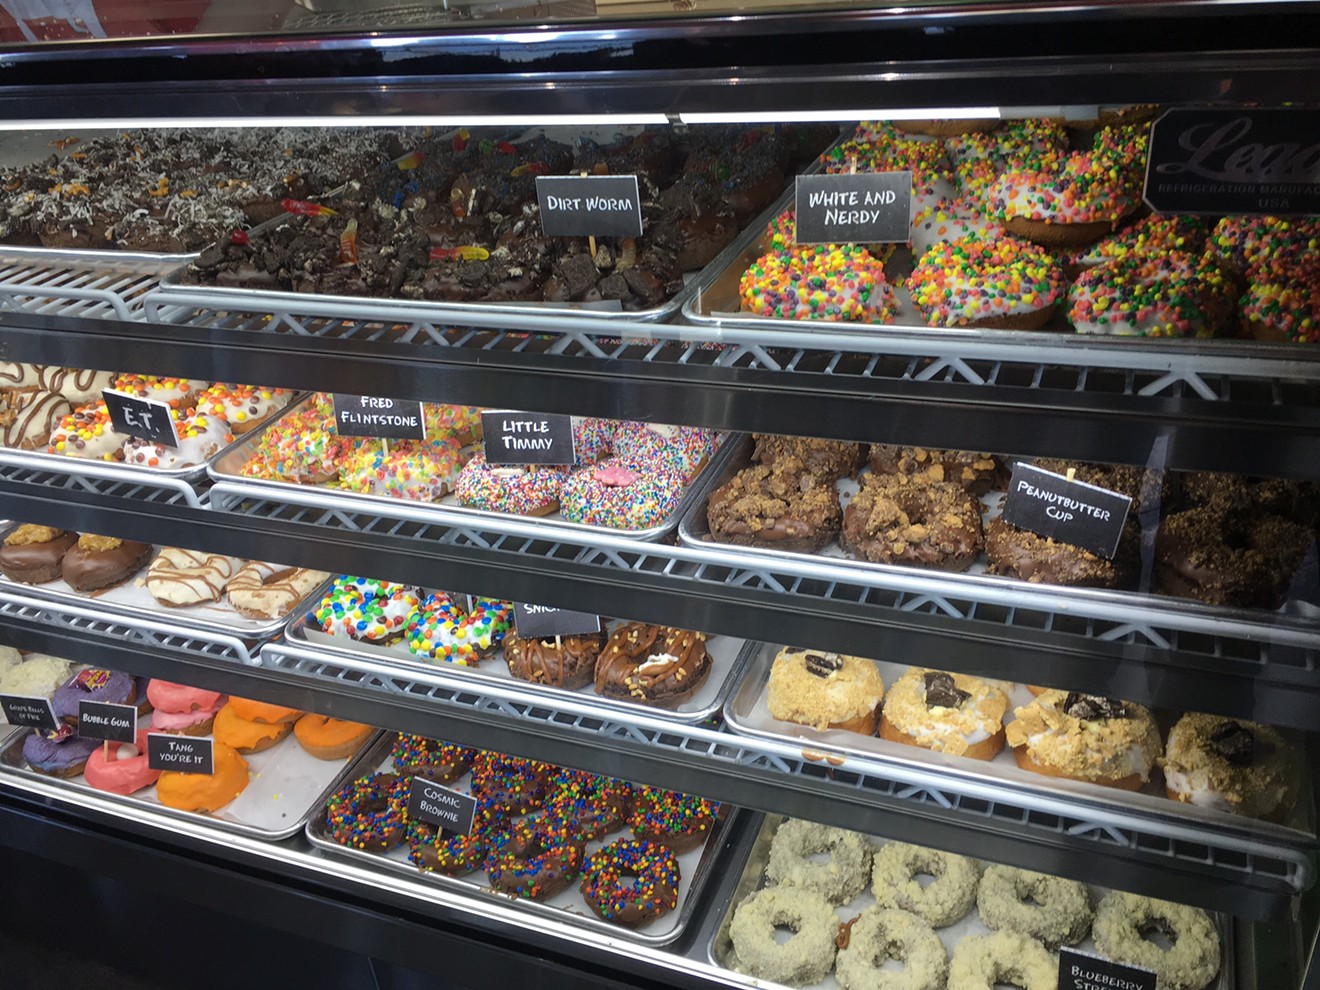 Despite the high levels of business, the cases stay stocked at Hurts Donut.